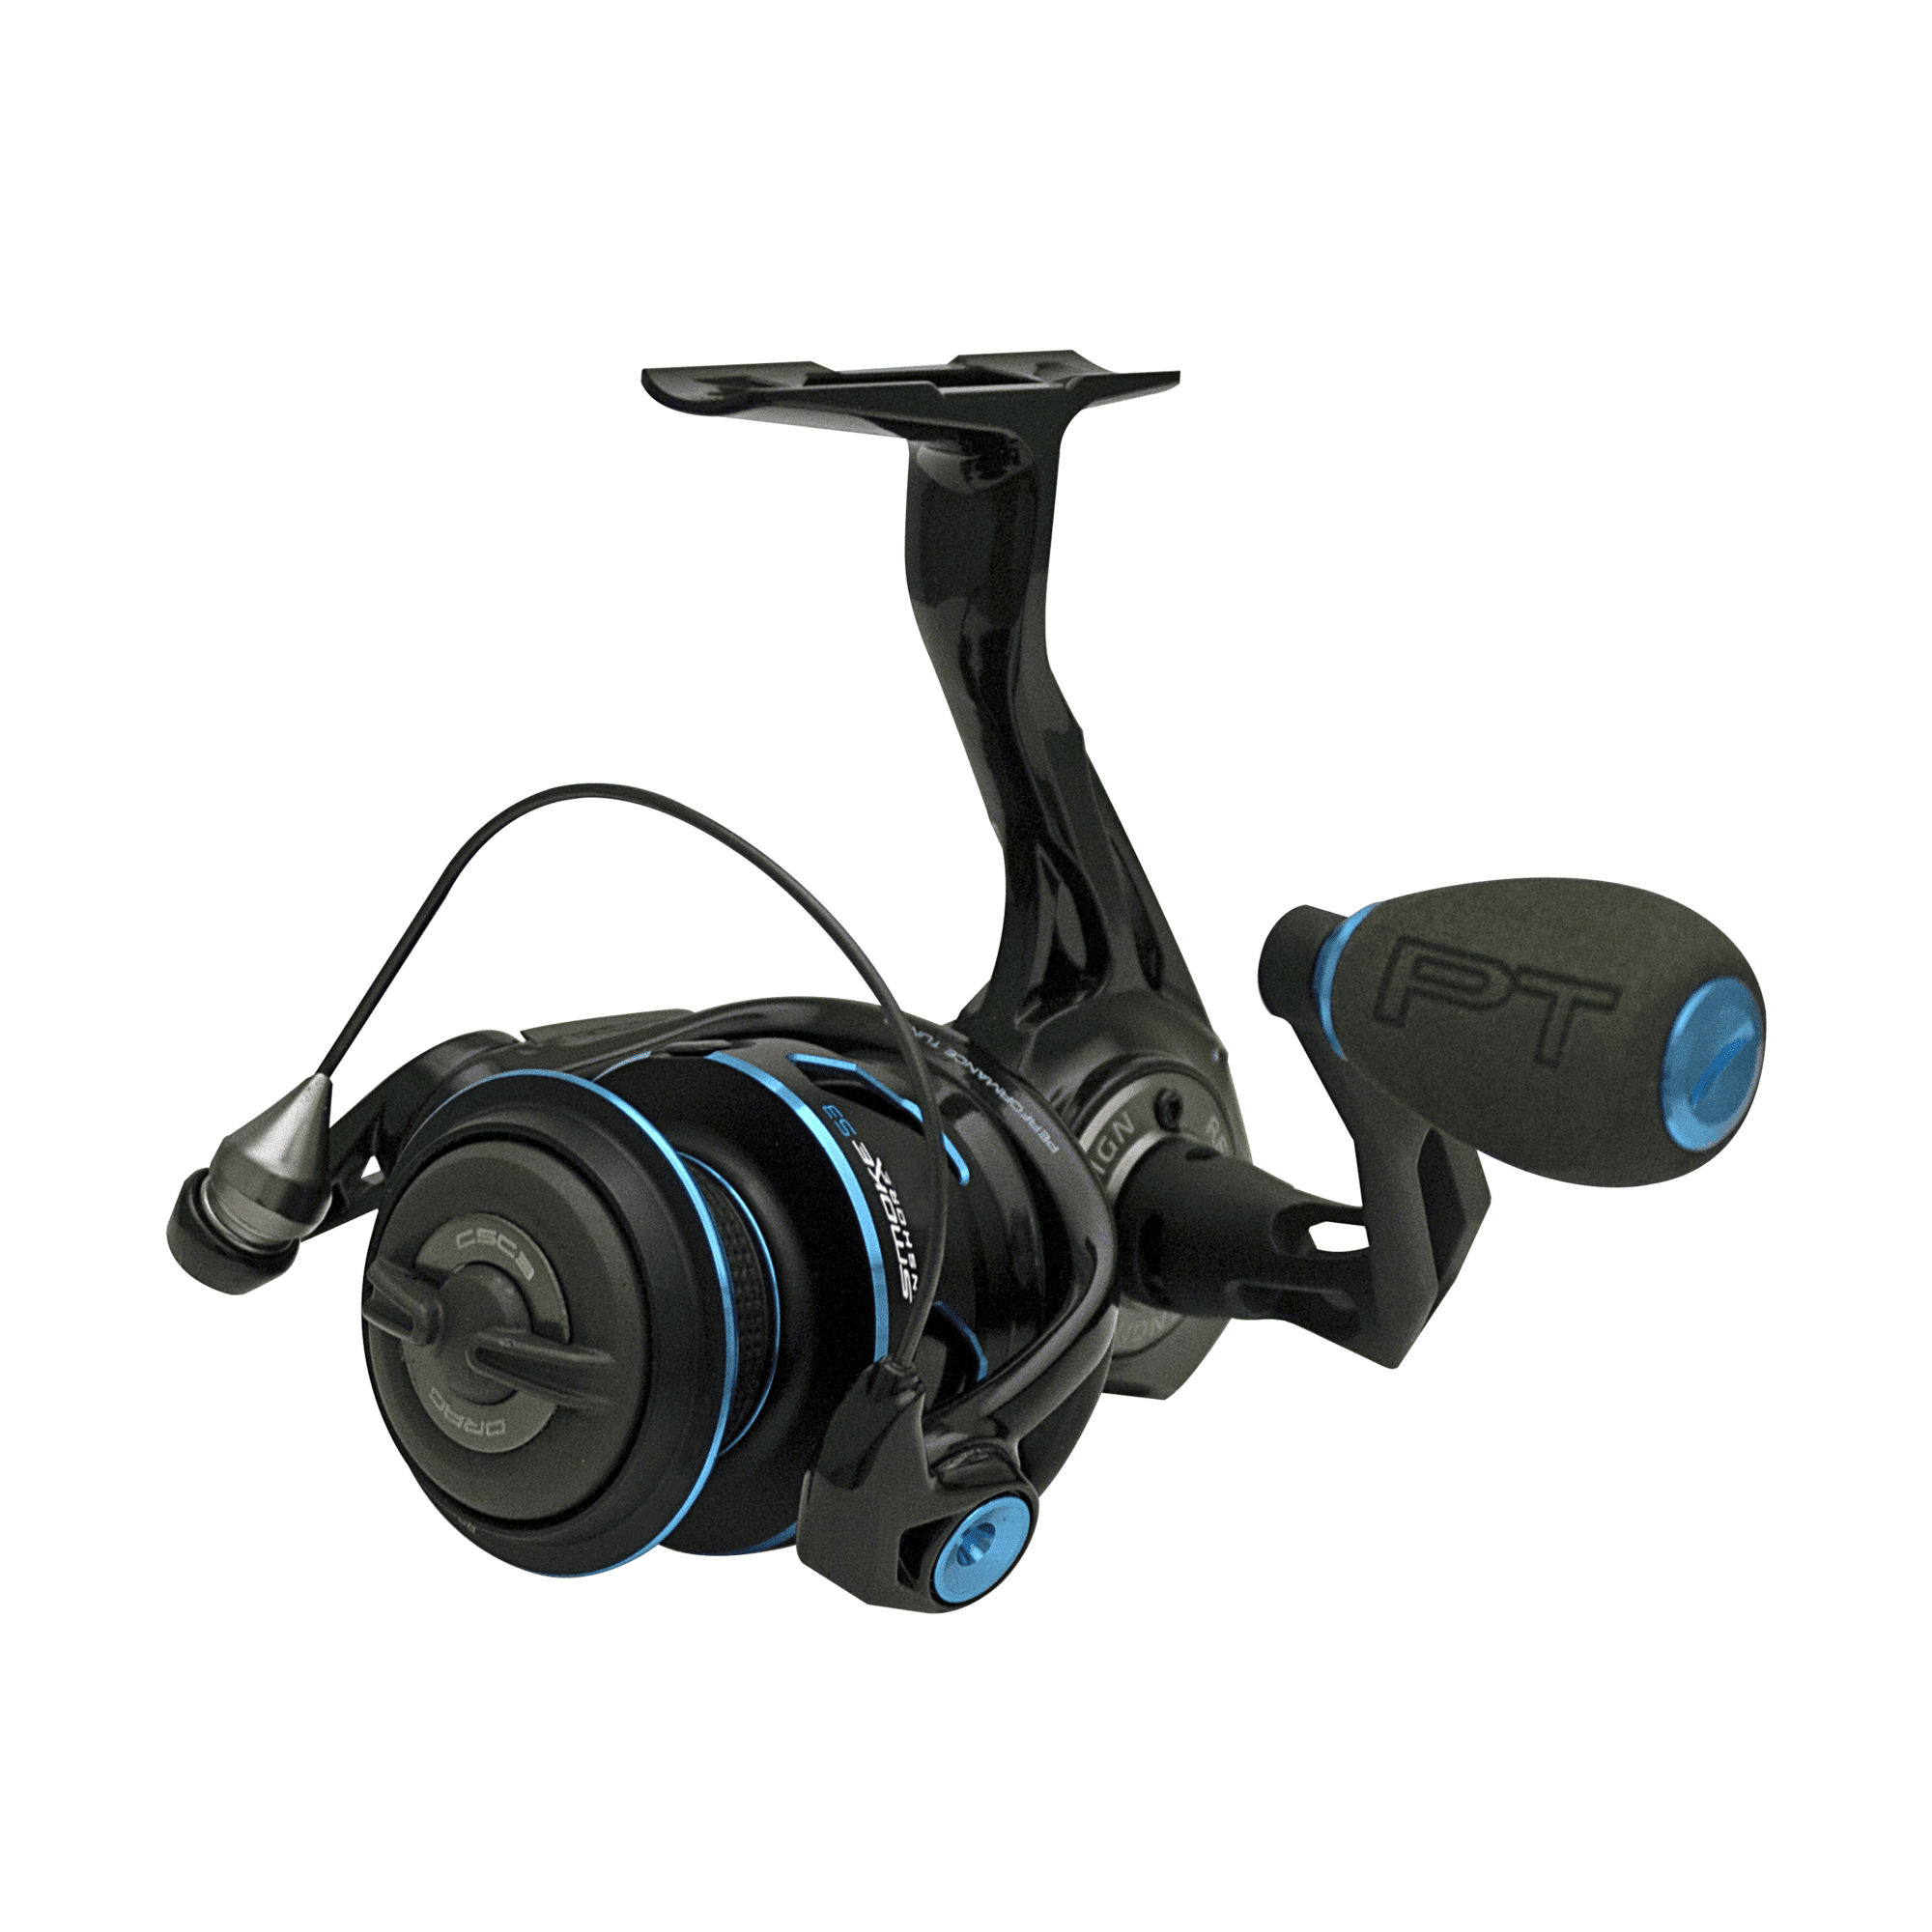 Quantum Blue Runner Spinning Fishing Reel, Size 60 Reel, Changeable Right-  or Left-Hand Retrieve, Lightweight Composite Body, TRU Balance Rotor, 5.2:1  Gear Ratio, Blue, Clam Packaging 